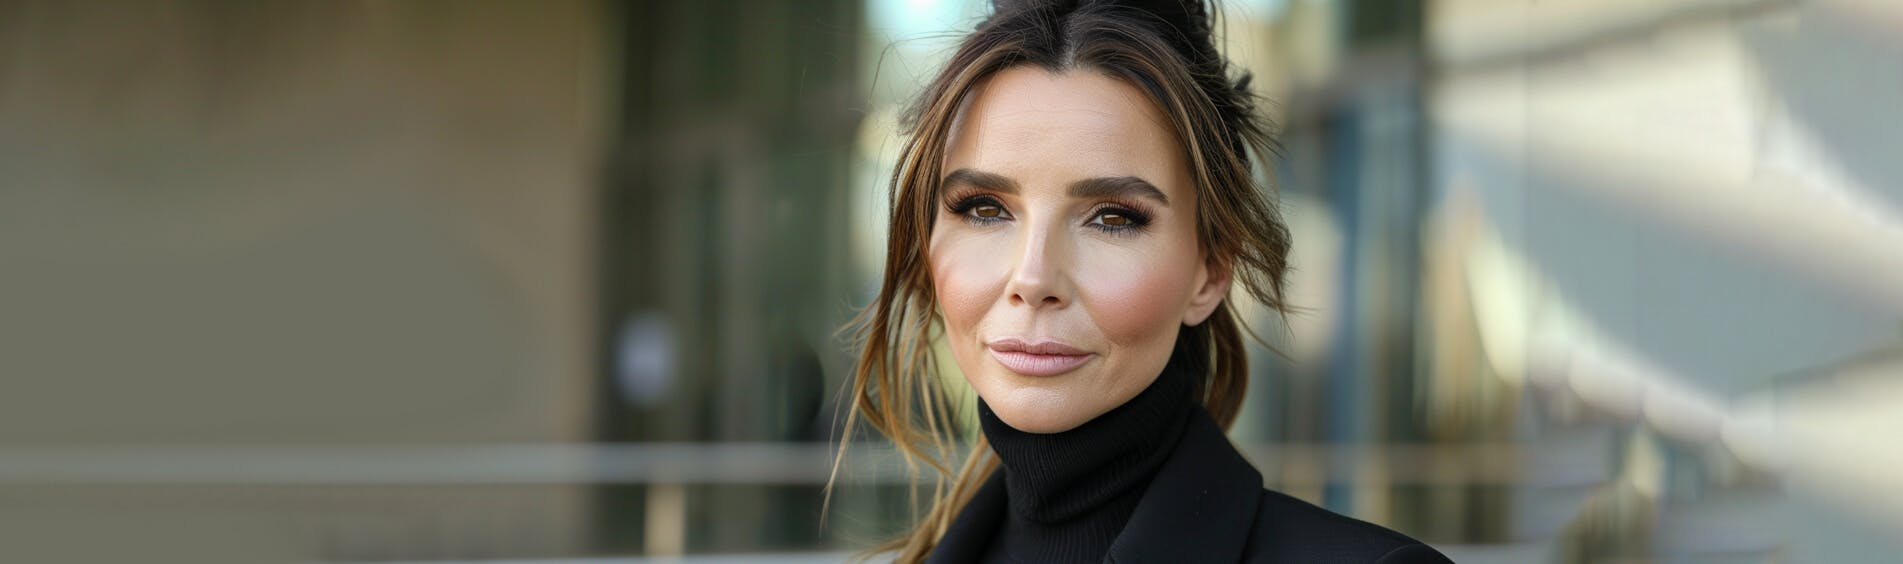 Cover Image for Aging Like Fine Wine: Victoria Beckham Stepped On The 50-Year Milestone